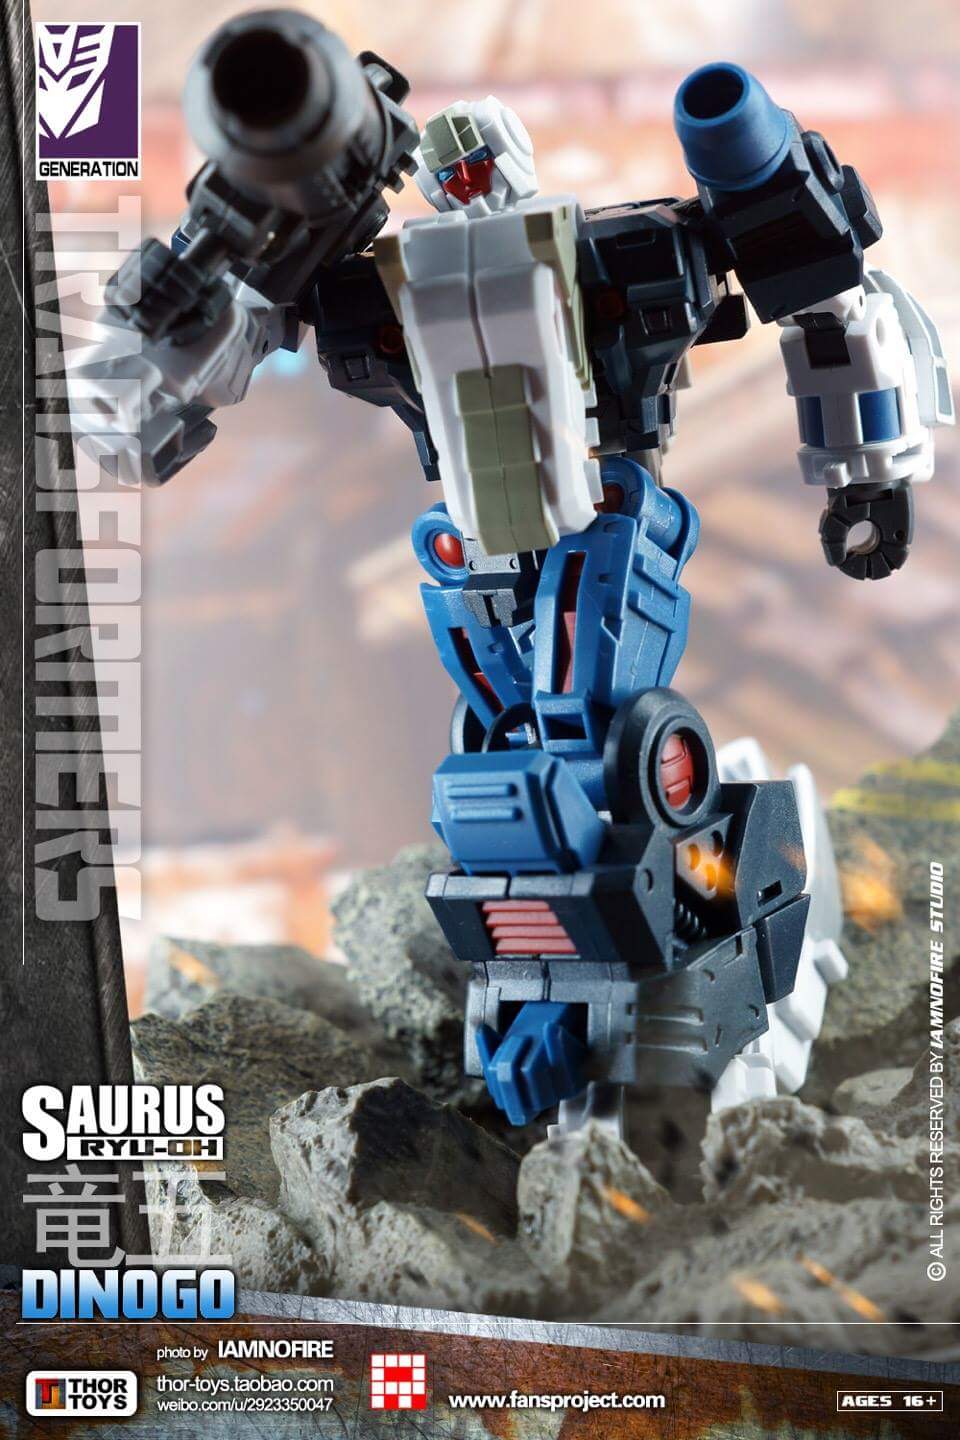 [FansProject] Produit Tiers - Ryu-Oh aka Dinoking (Victory) | Beastructor aka Monstructor (USA) - Page 2 YlKPdAg5